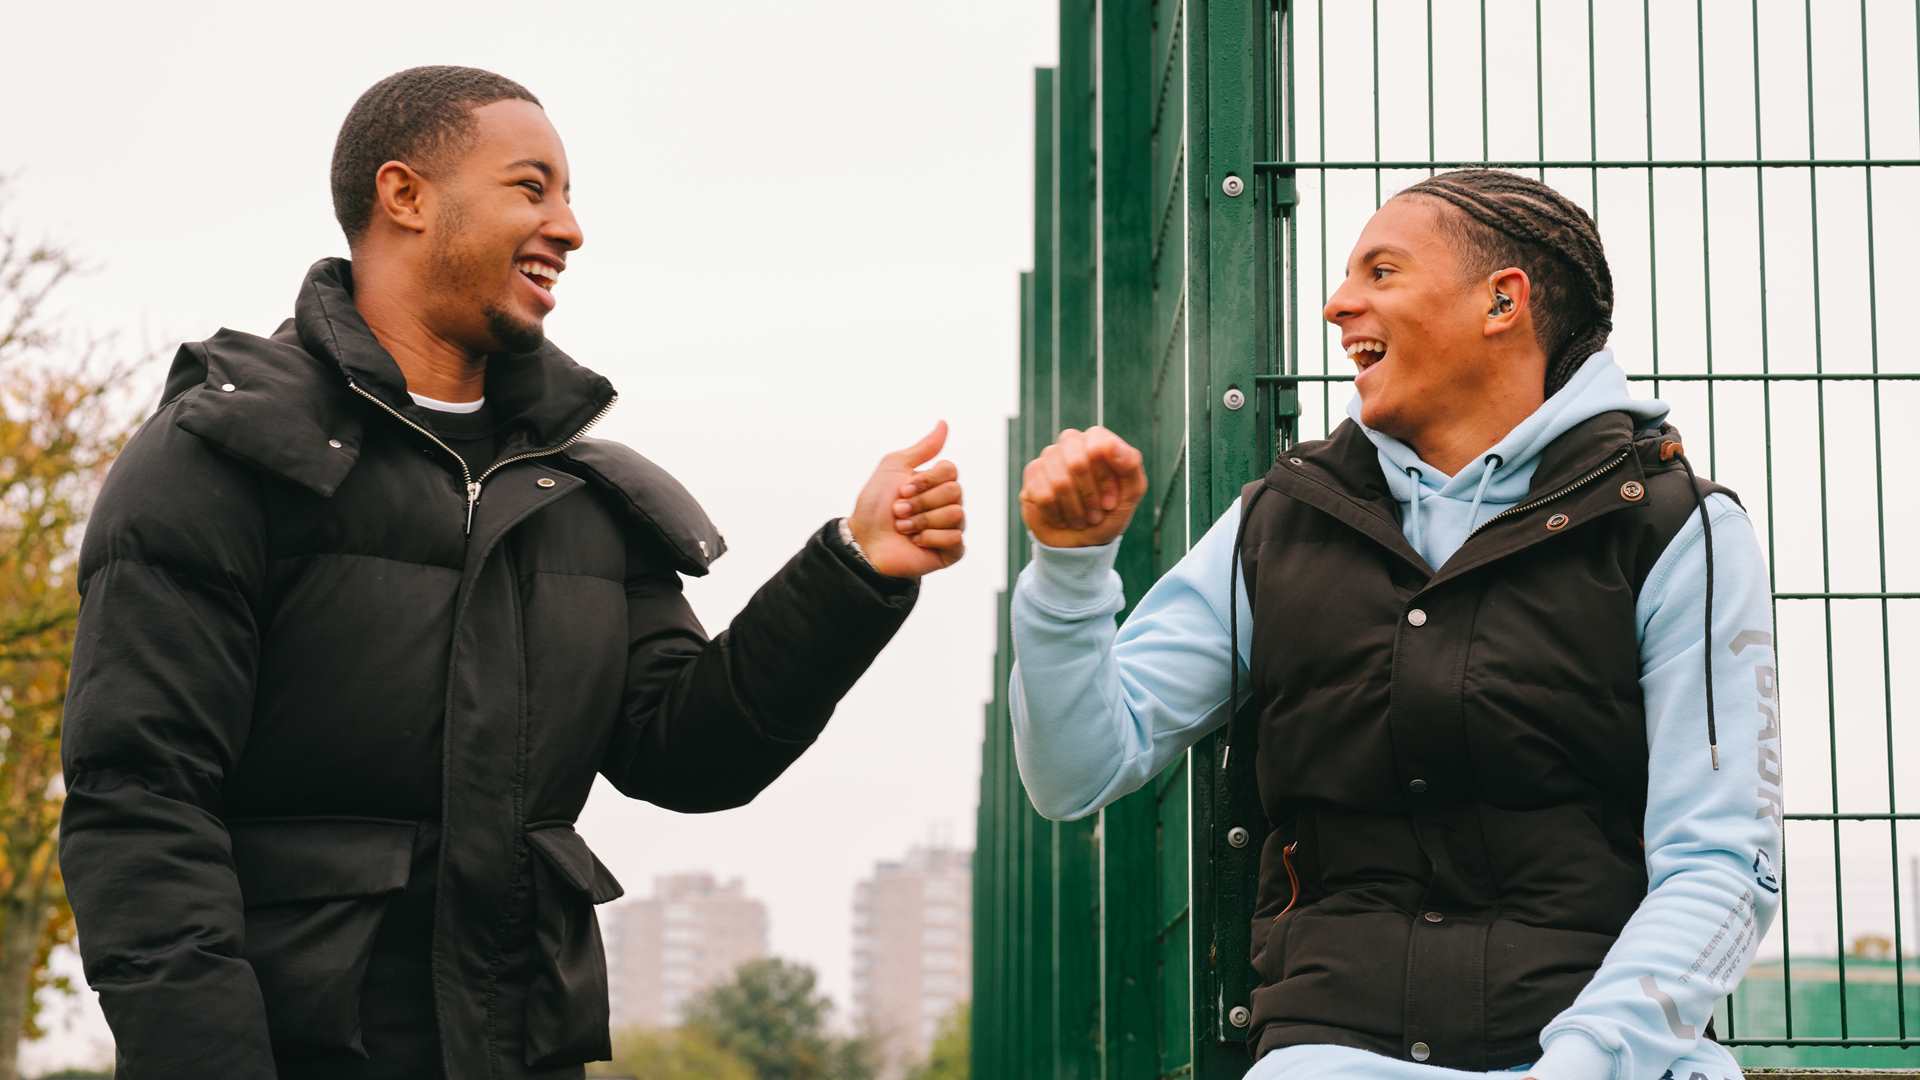 A Black teenage boy wearing a hearing aid bumping fists with a young Black man in the park.